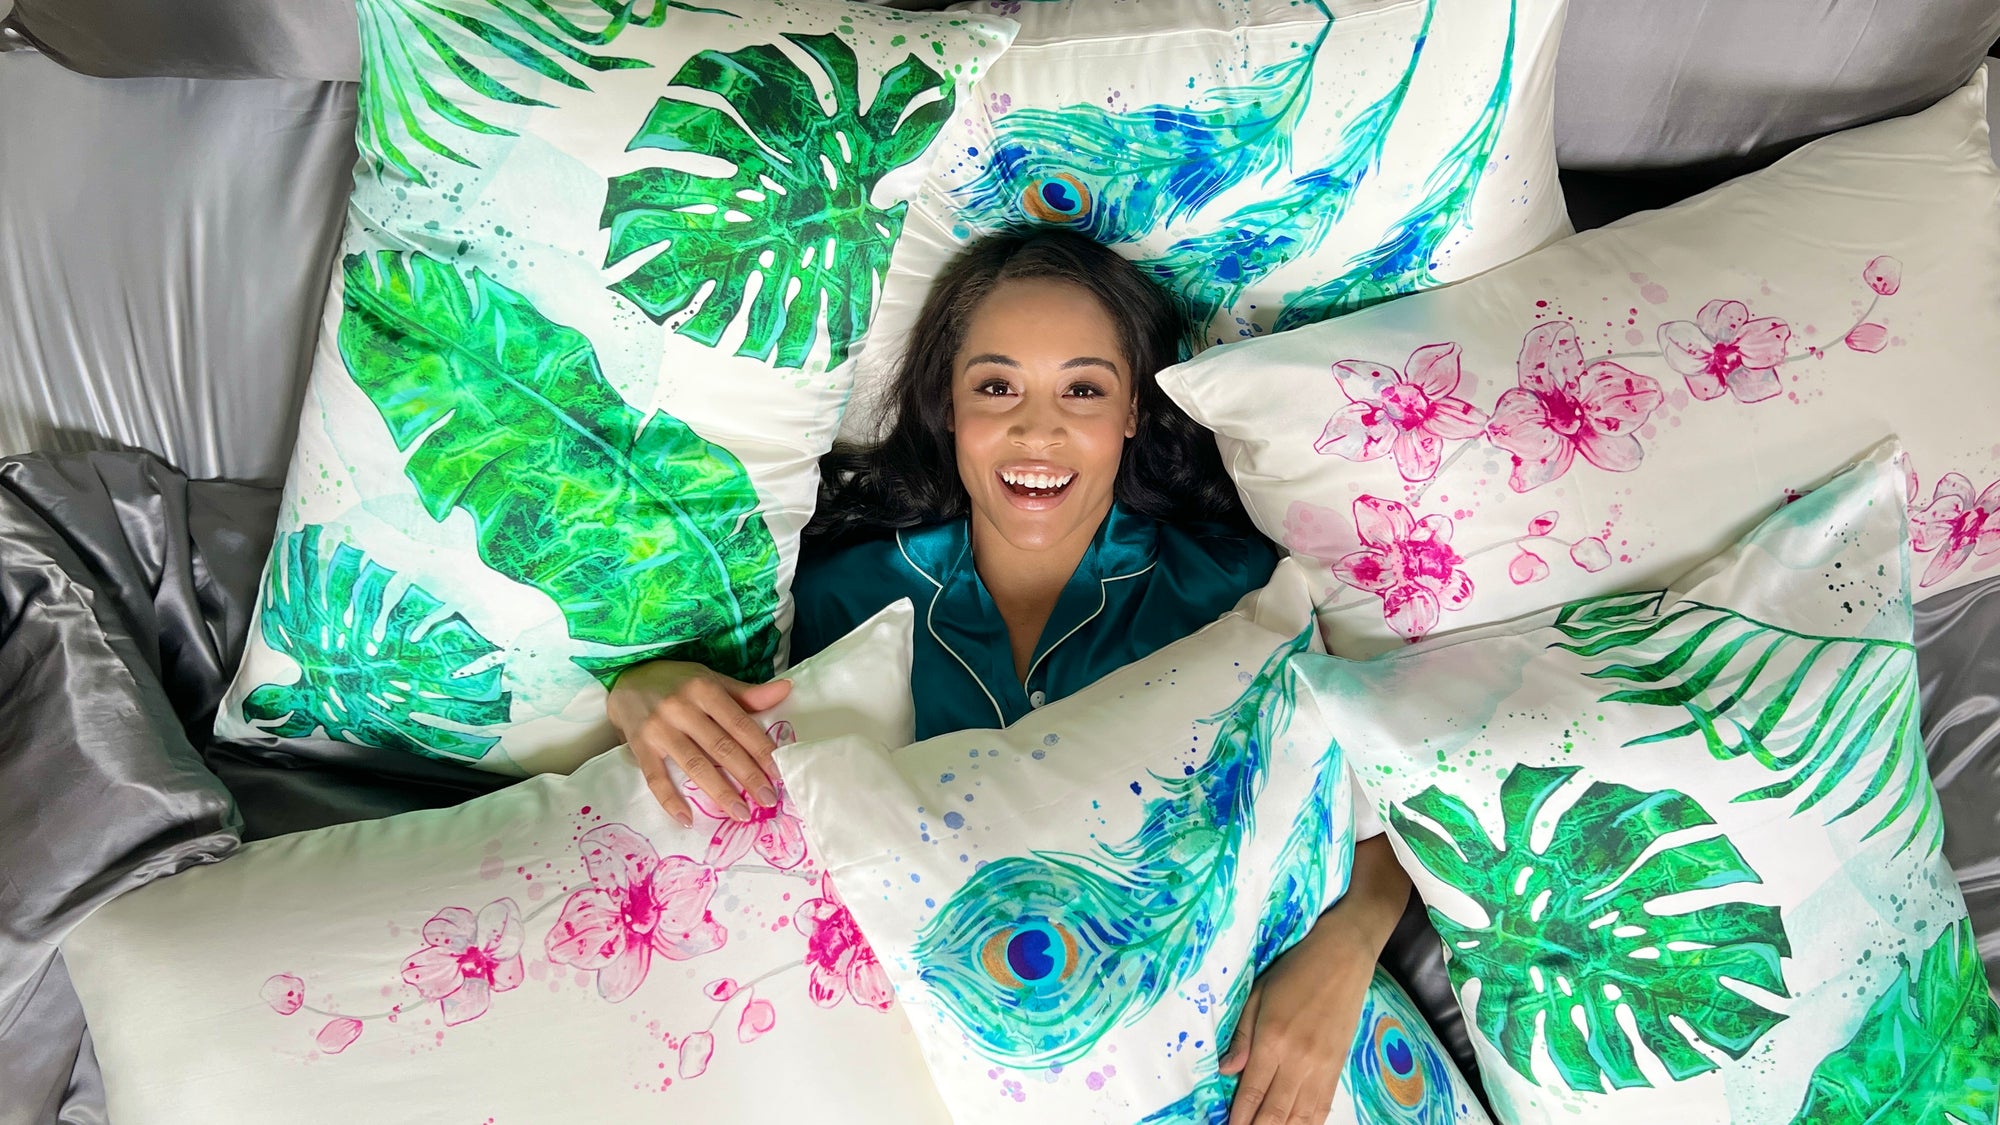 Silk Pillowcases That Are a Work of Art! New Mulberry Park Silks’ Nature-Inspired Series Collaboration with Elyssa Helfman